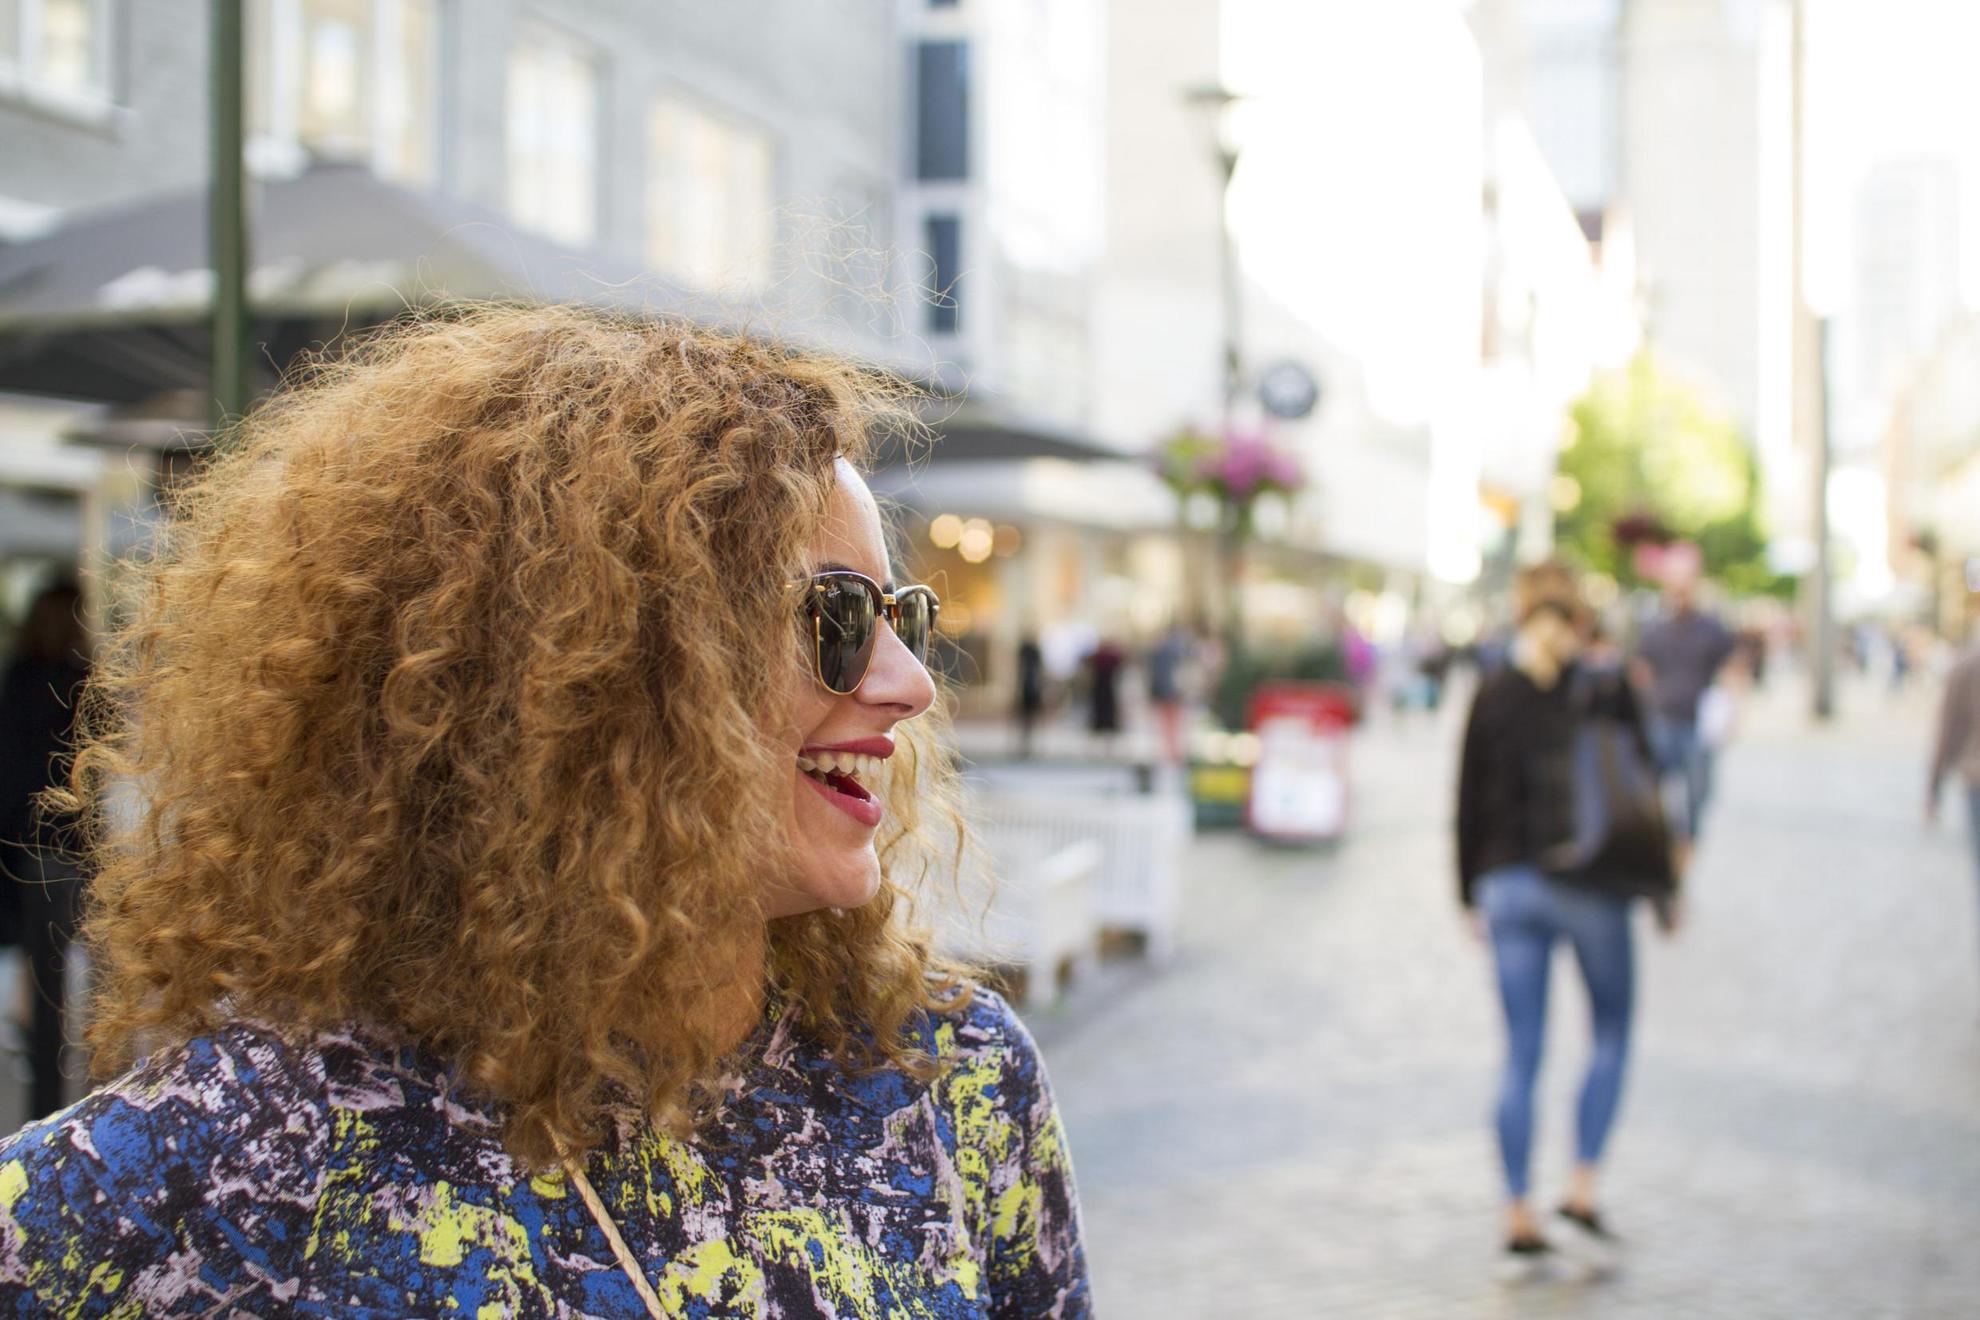 Profile of a woman wearing shades standing on a pedestrian street in Malmö.